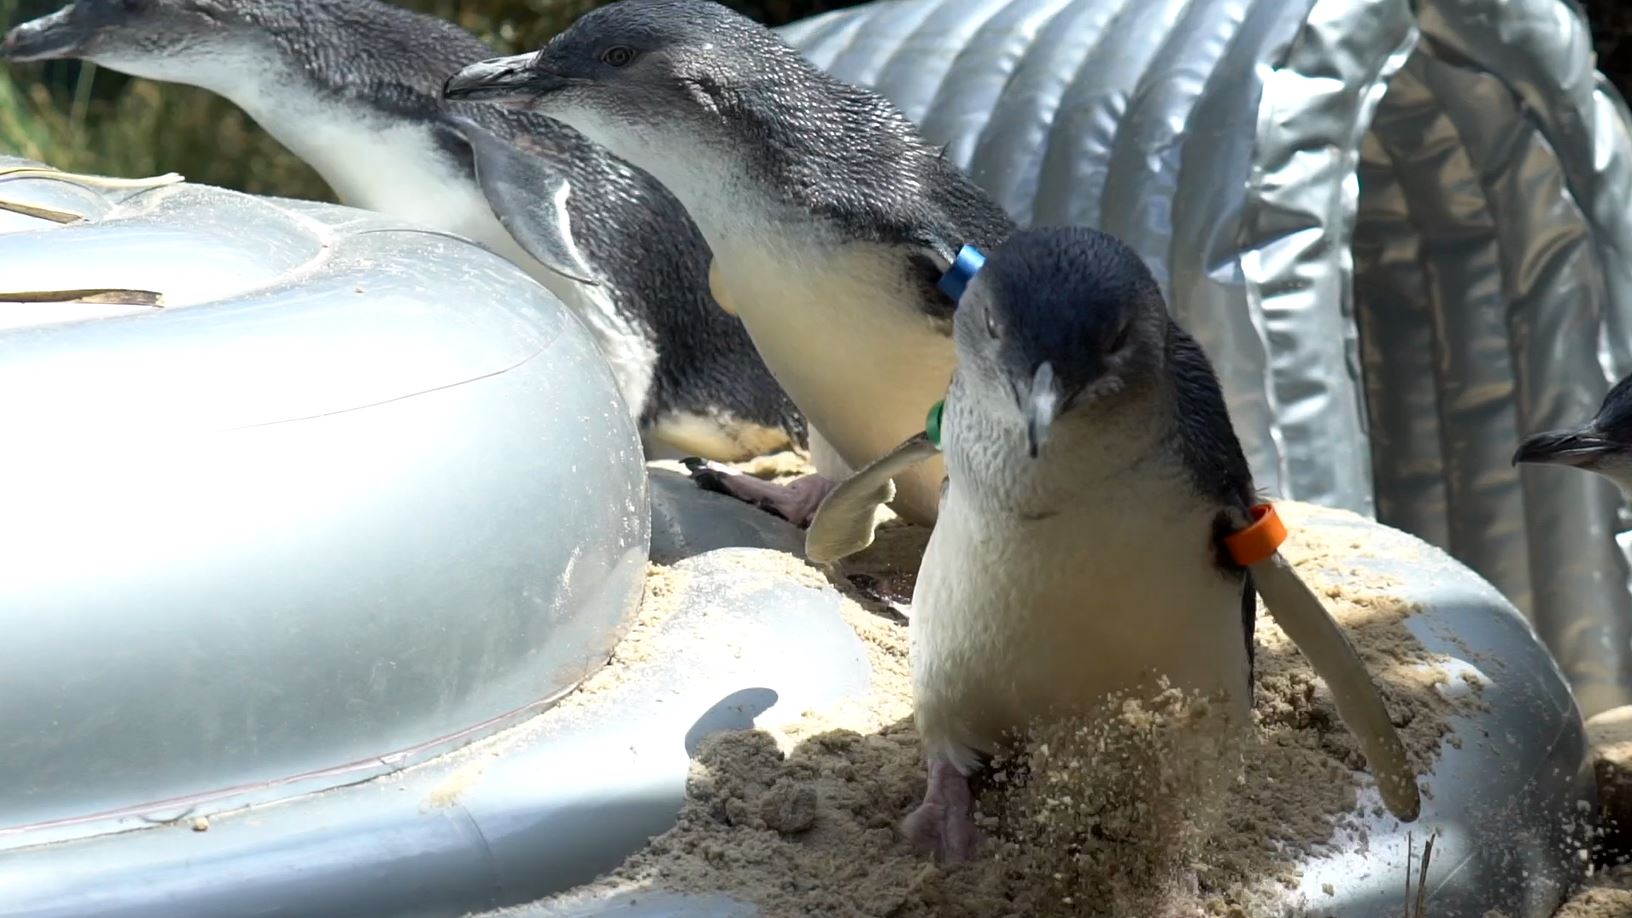 Jumping Castle fun for penguins at Melbourne Zoo